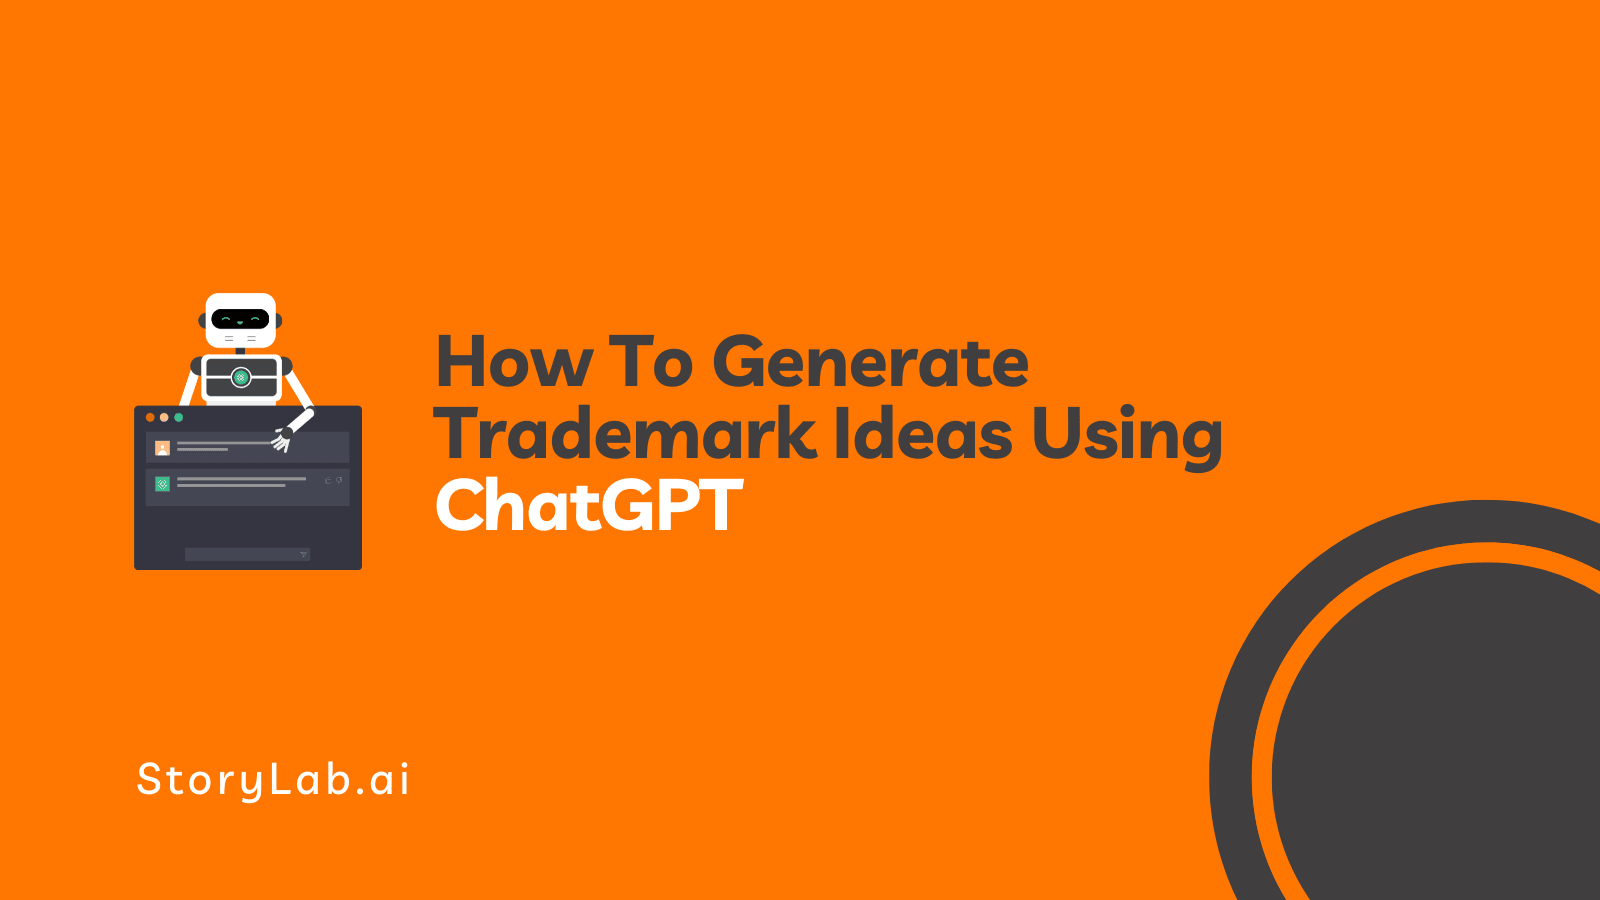 How To Generate Trademark Ideas Using ChatGPT